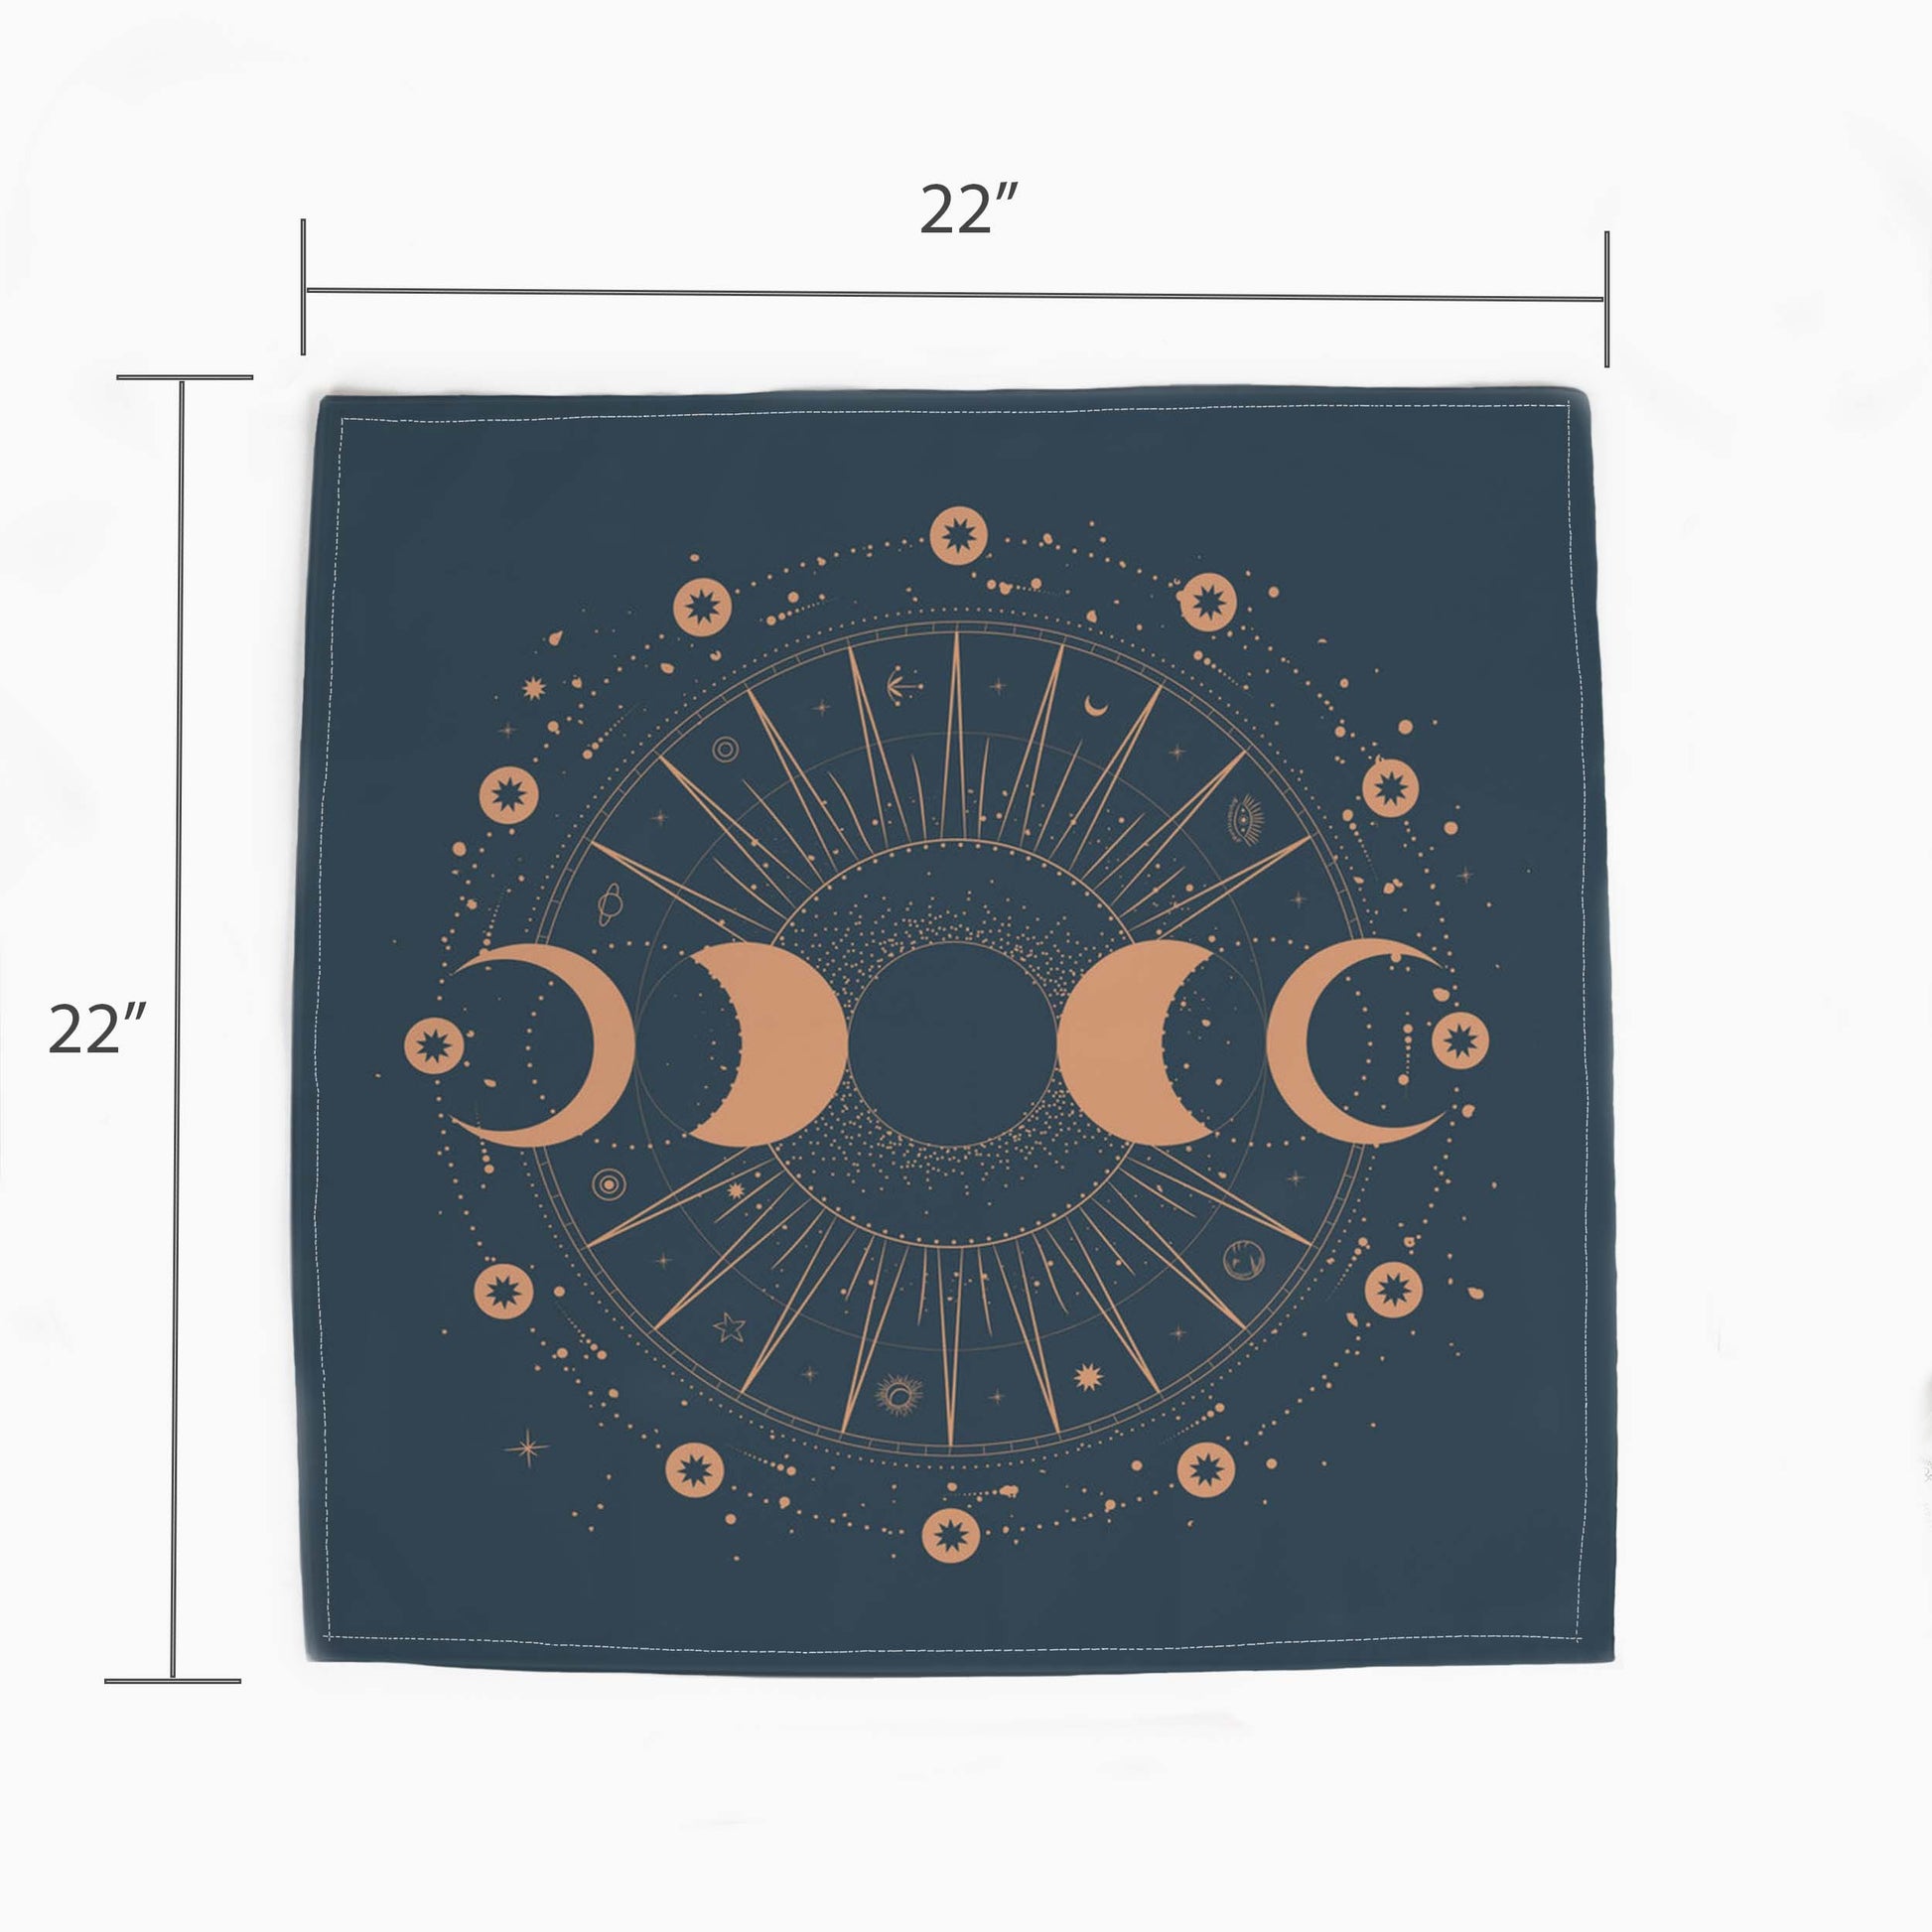 22" x 22" Pink and blue Wiccan altar cloth or Pagan altar cloth with moon phases